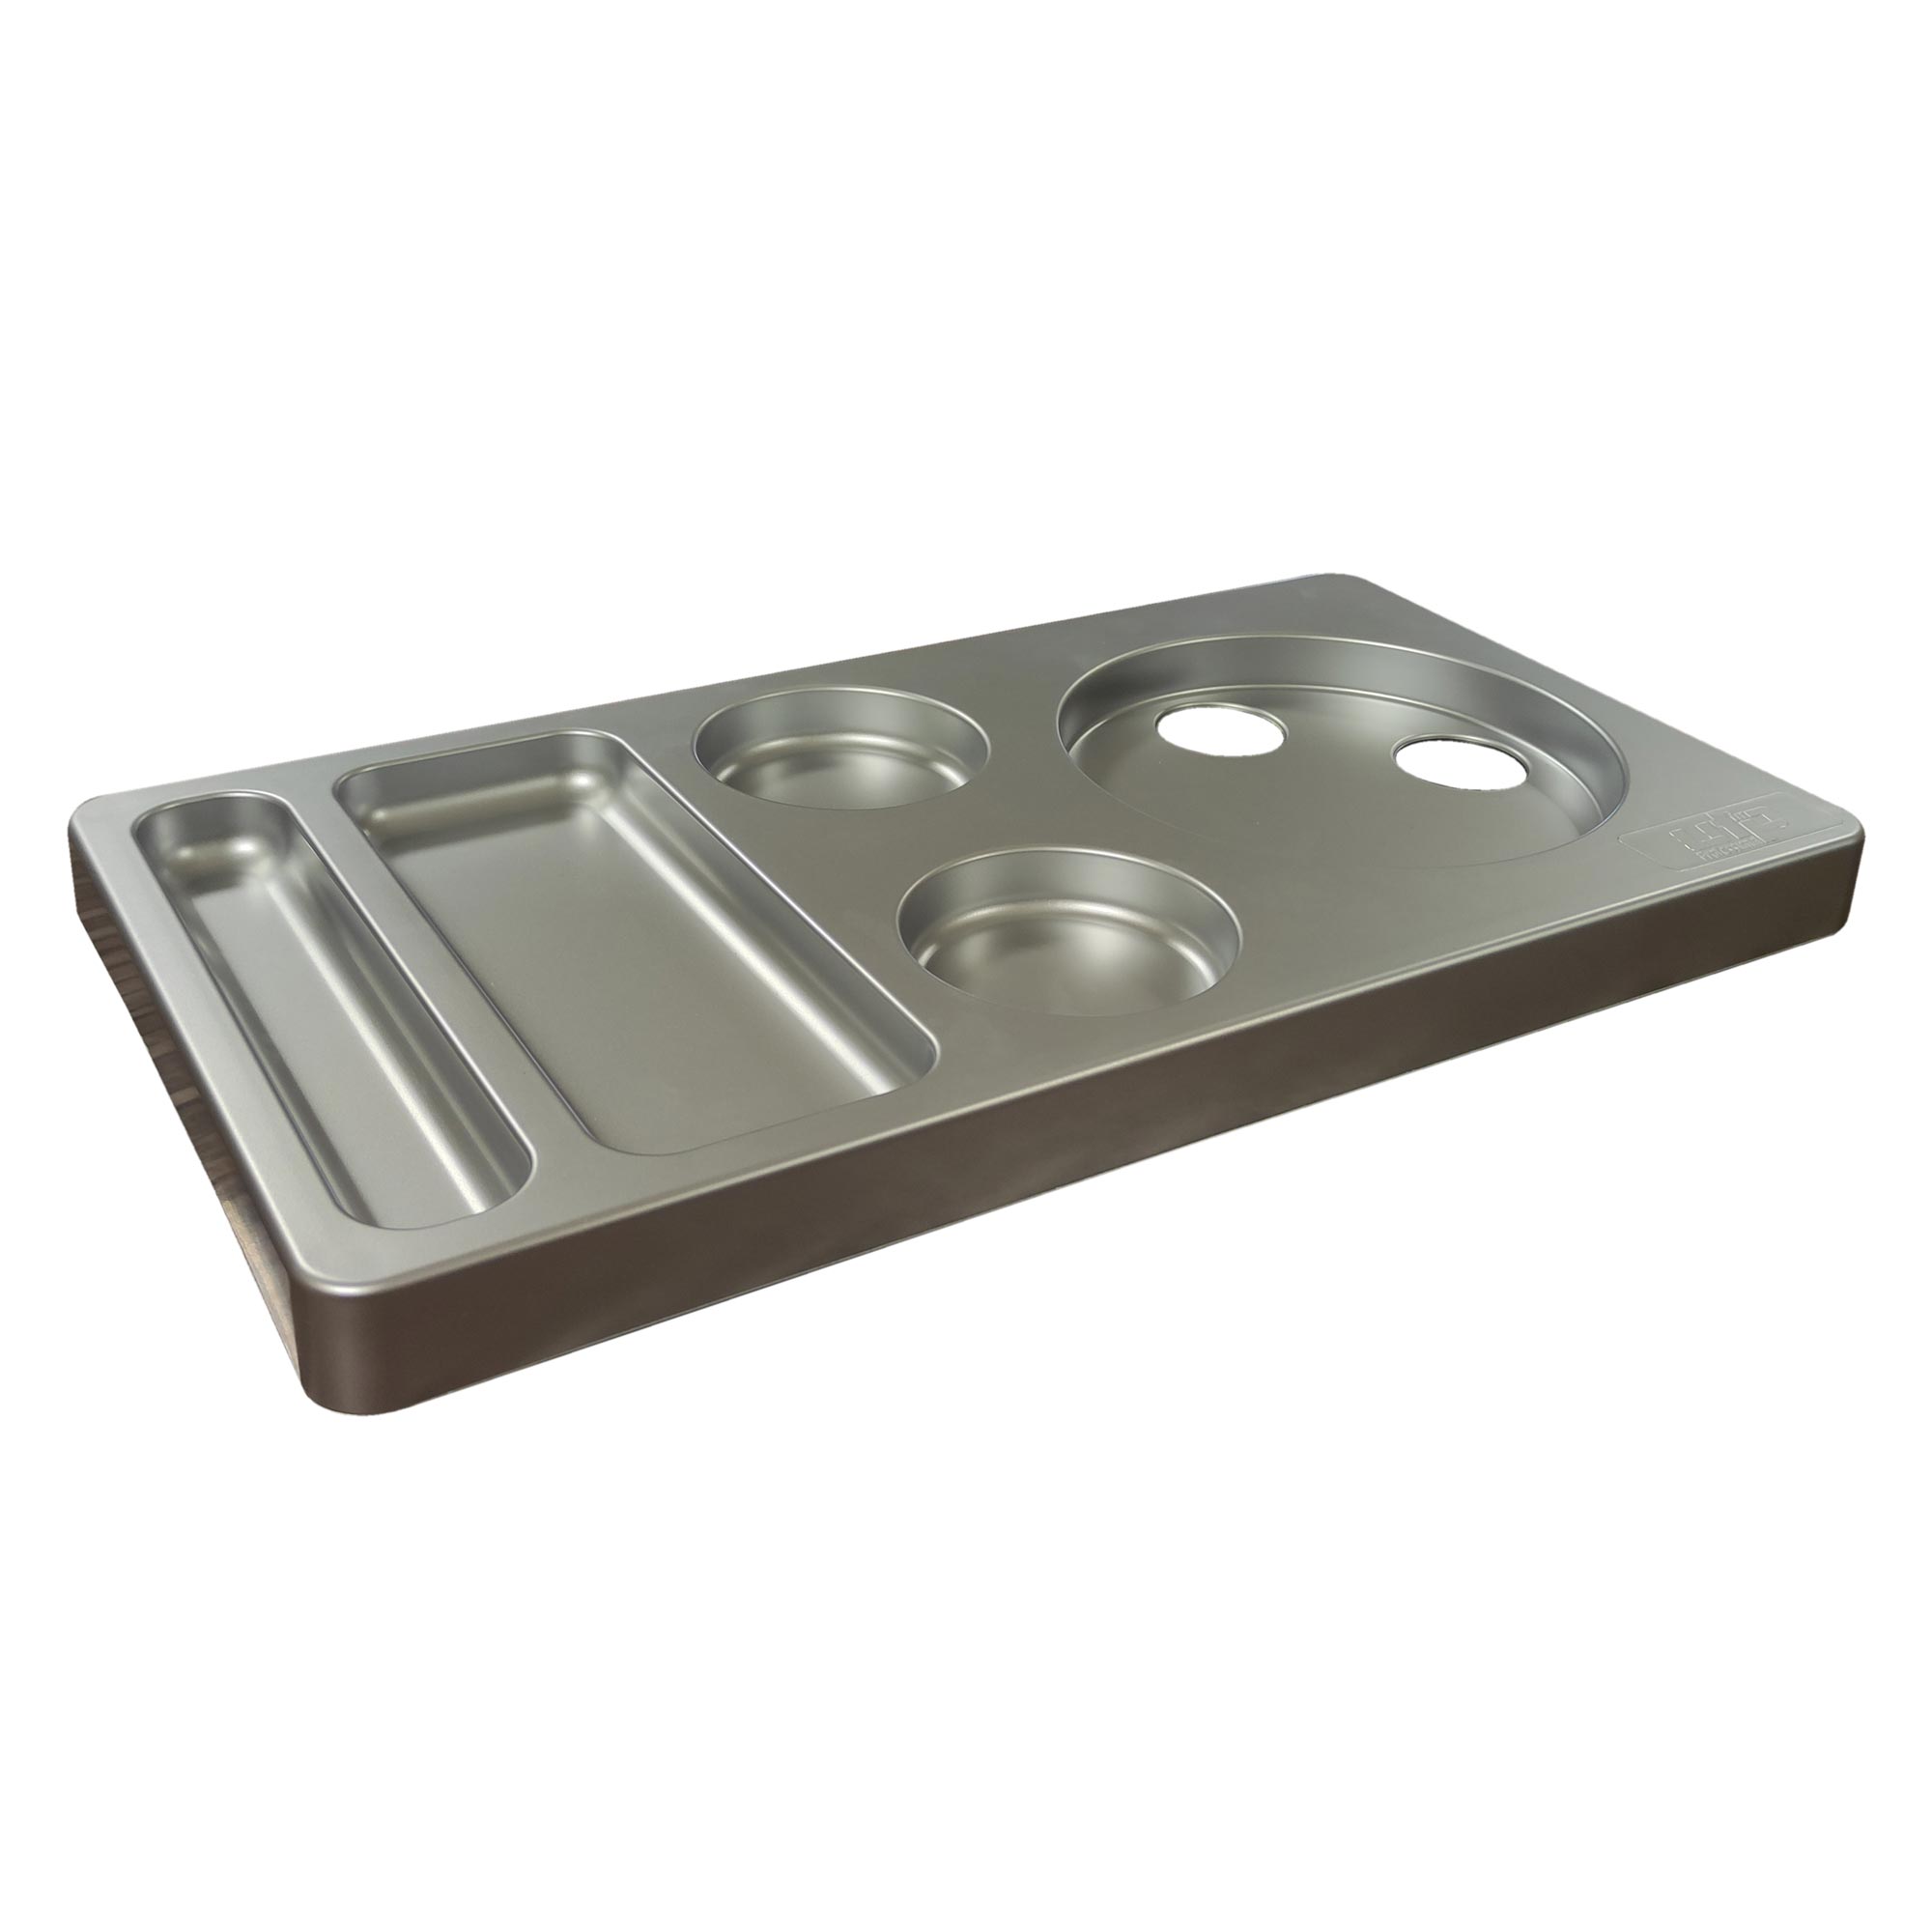 HOTEL TYPE WELCOME AND DINING TRAY SILVER